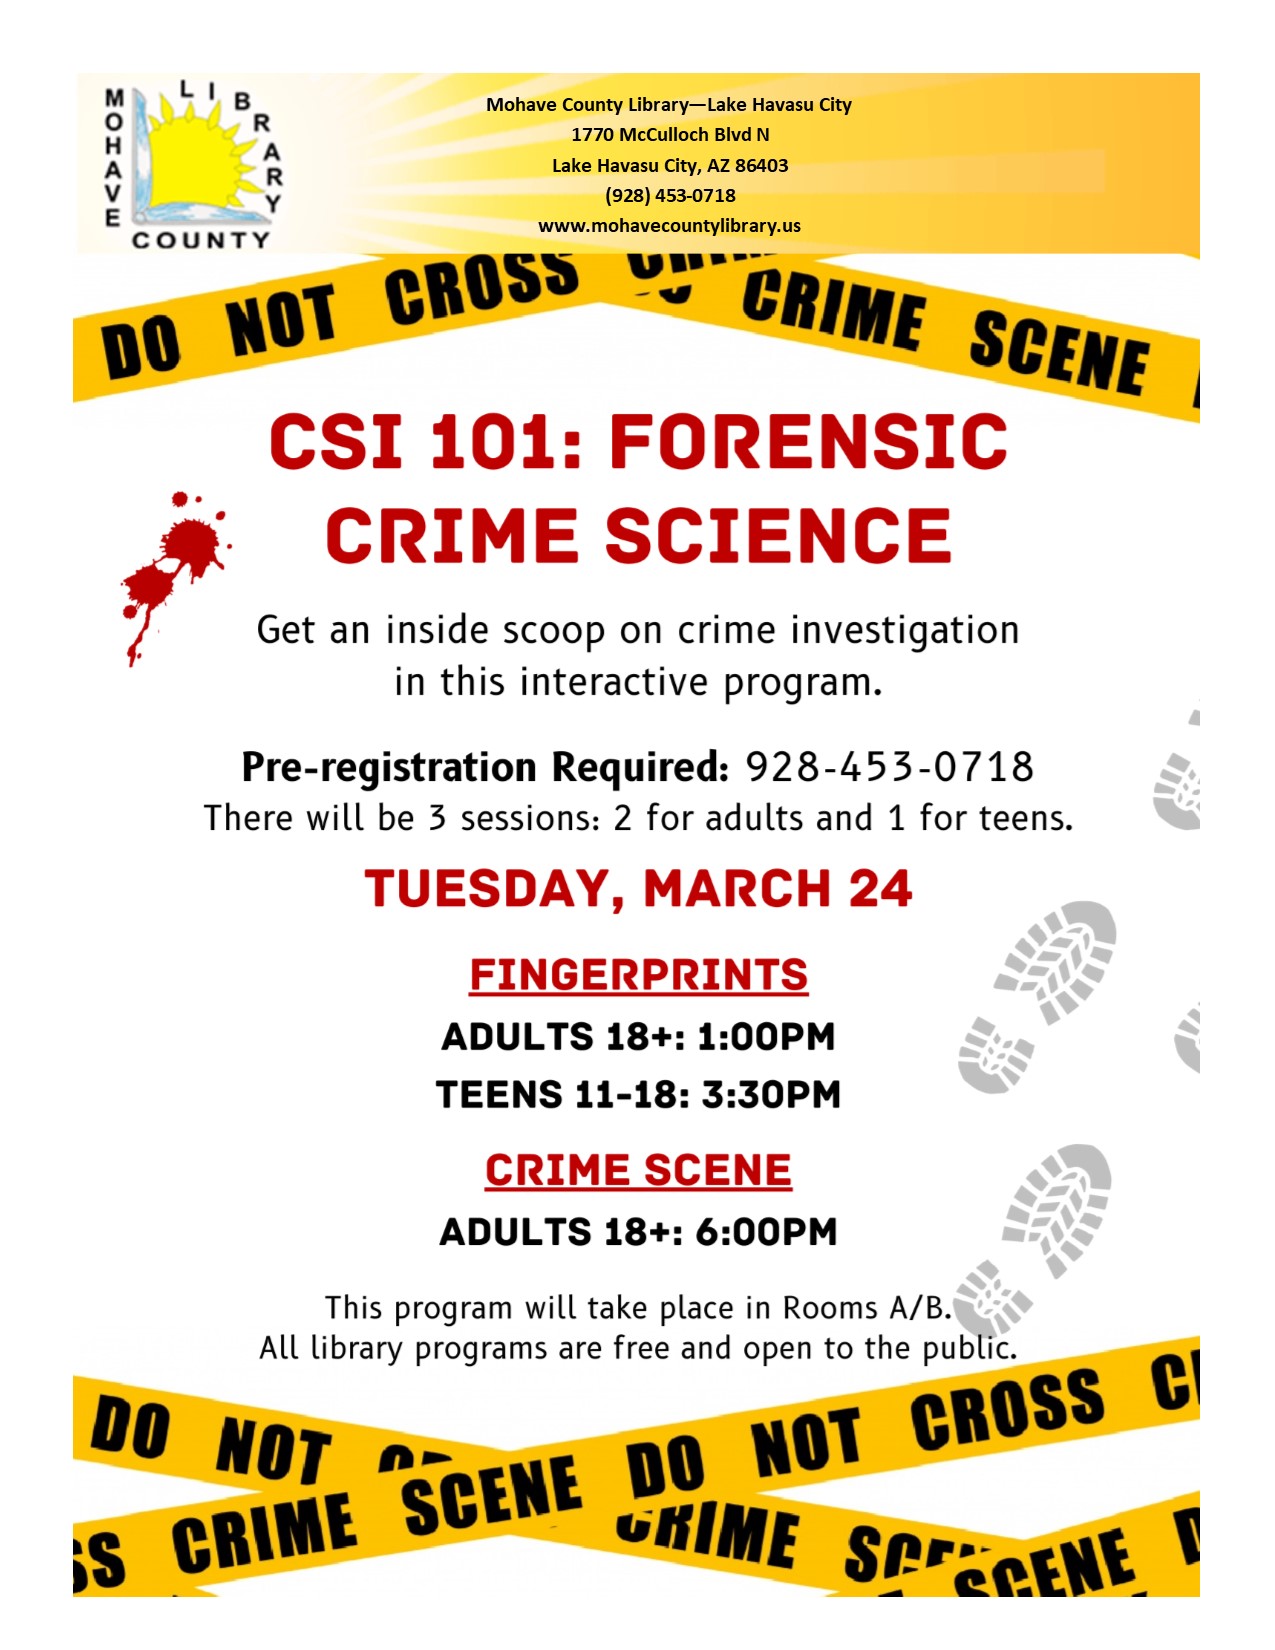 CSI 101 Forensic Crime Science is now cancelled